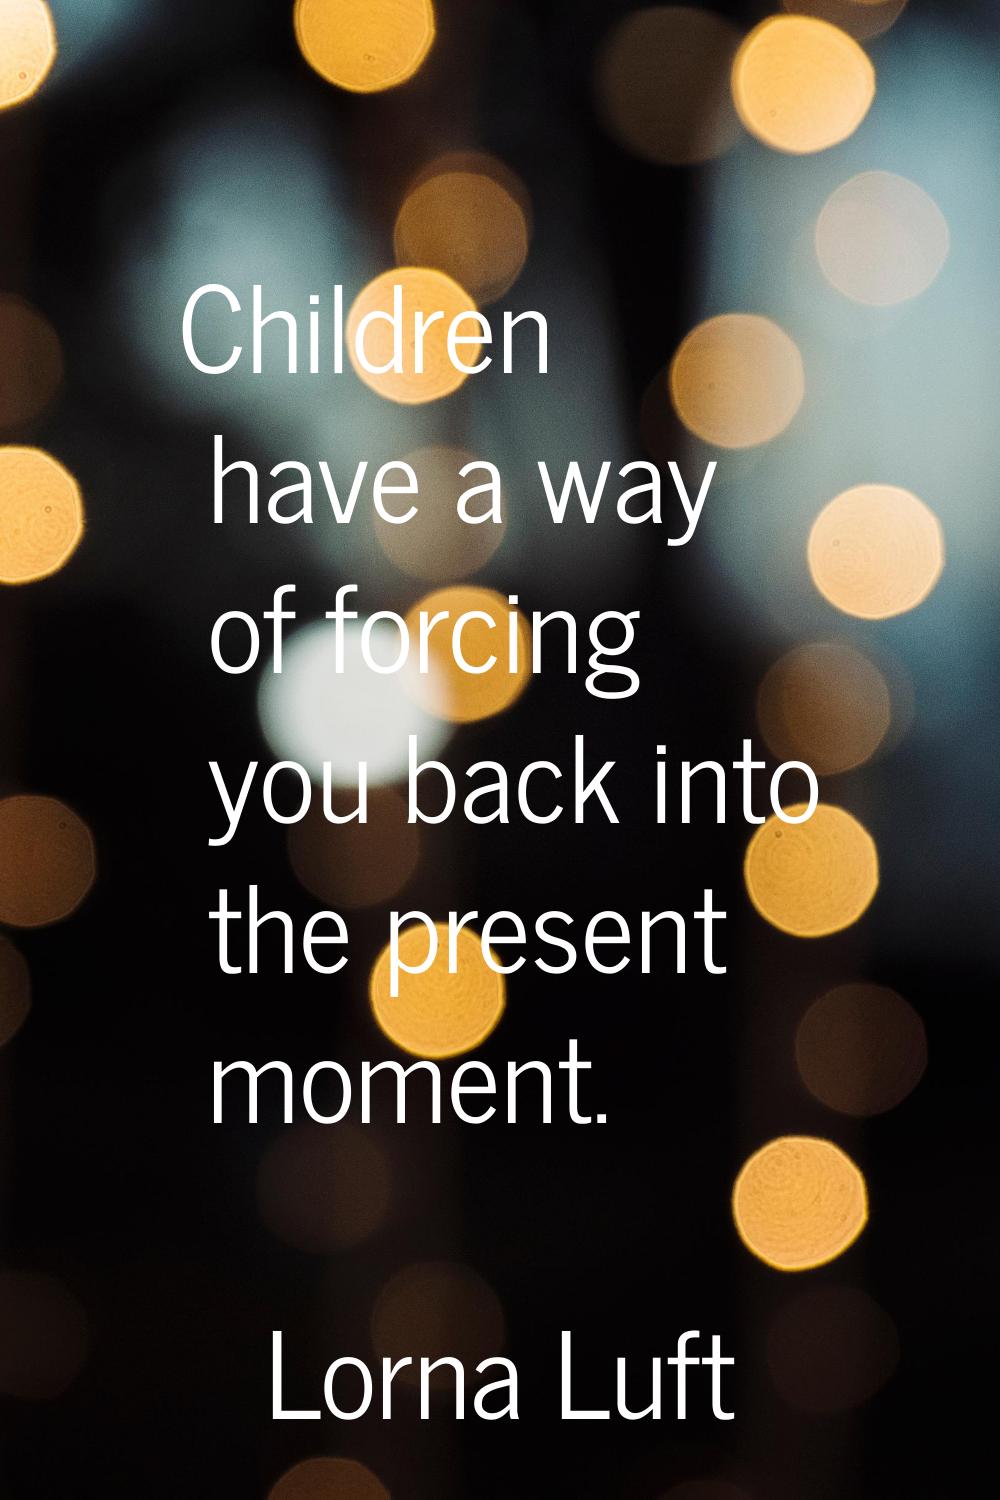 Children have a way of forcing you back into the present moment.